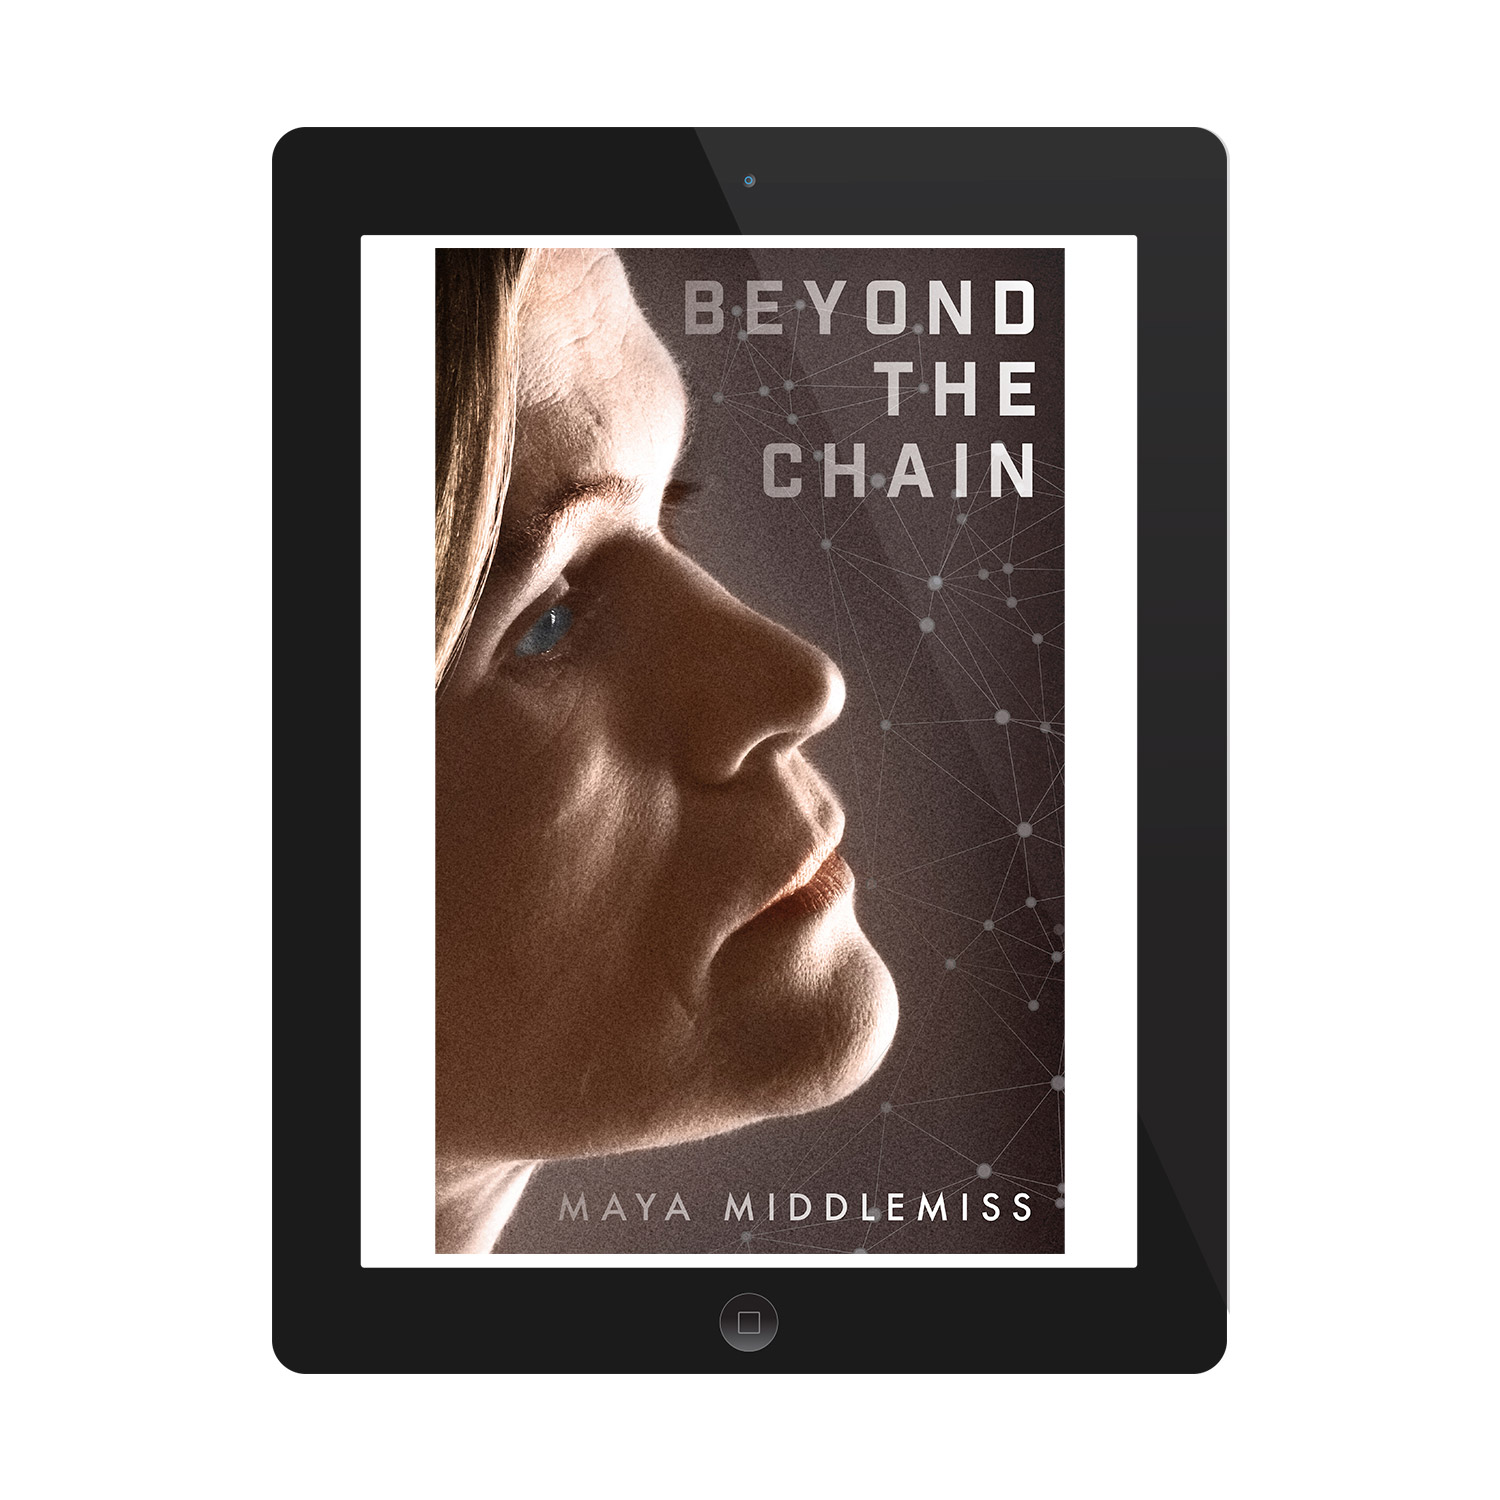 'Beyond The Chain' is a terrific female-led thriller. The author is Maya Middlemiss. The book cover design and interior formatting are by Mark Thomas. To learn more about what Mark could do for your book, please visit coverness.com.